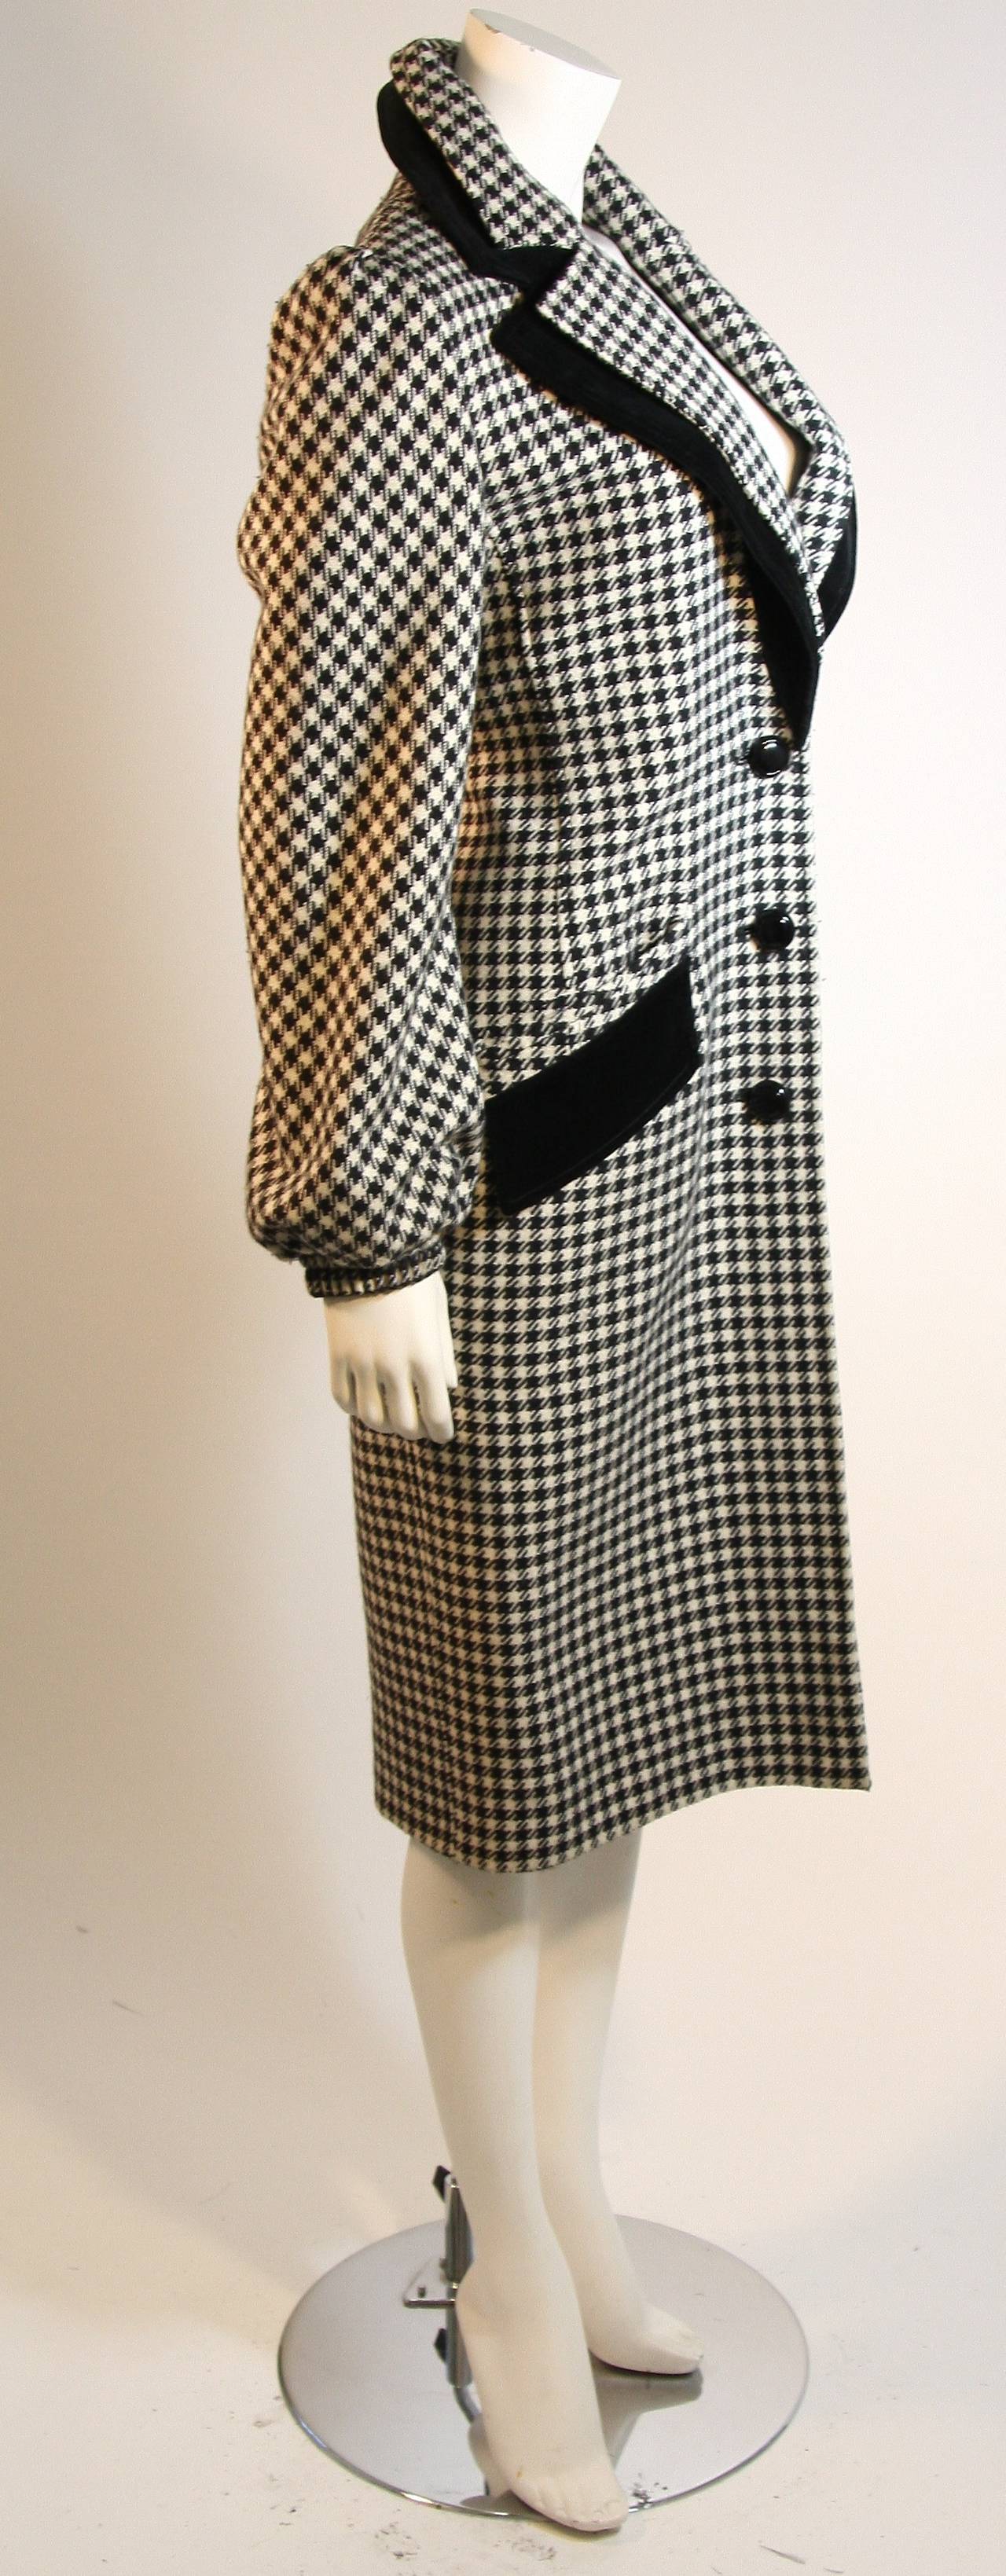 Valentino Houndstooth Coat with Velvet Accents 1